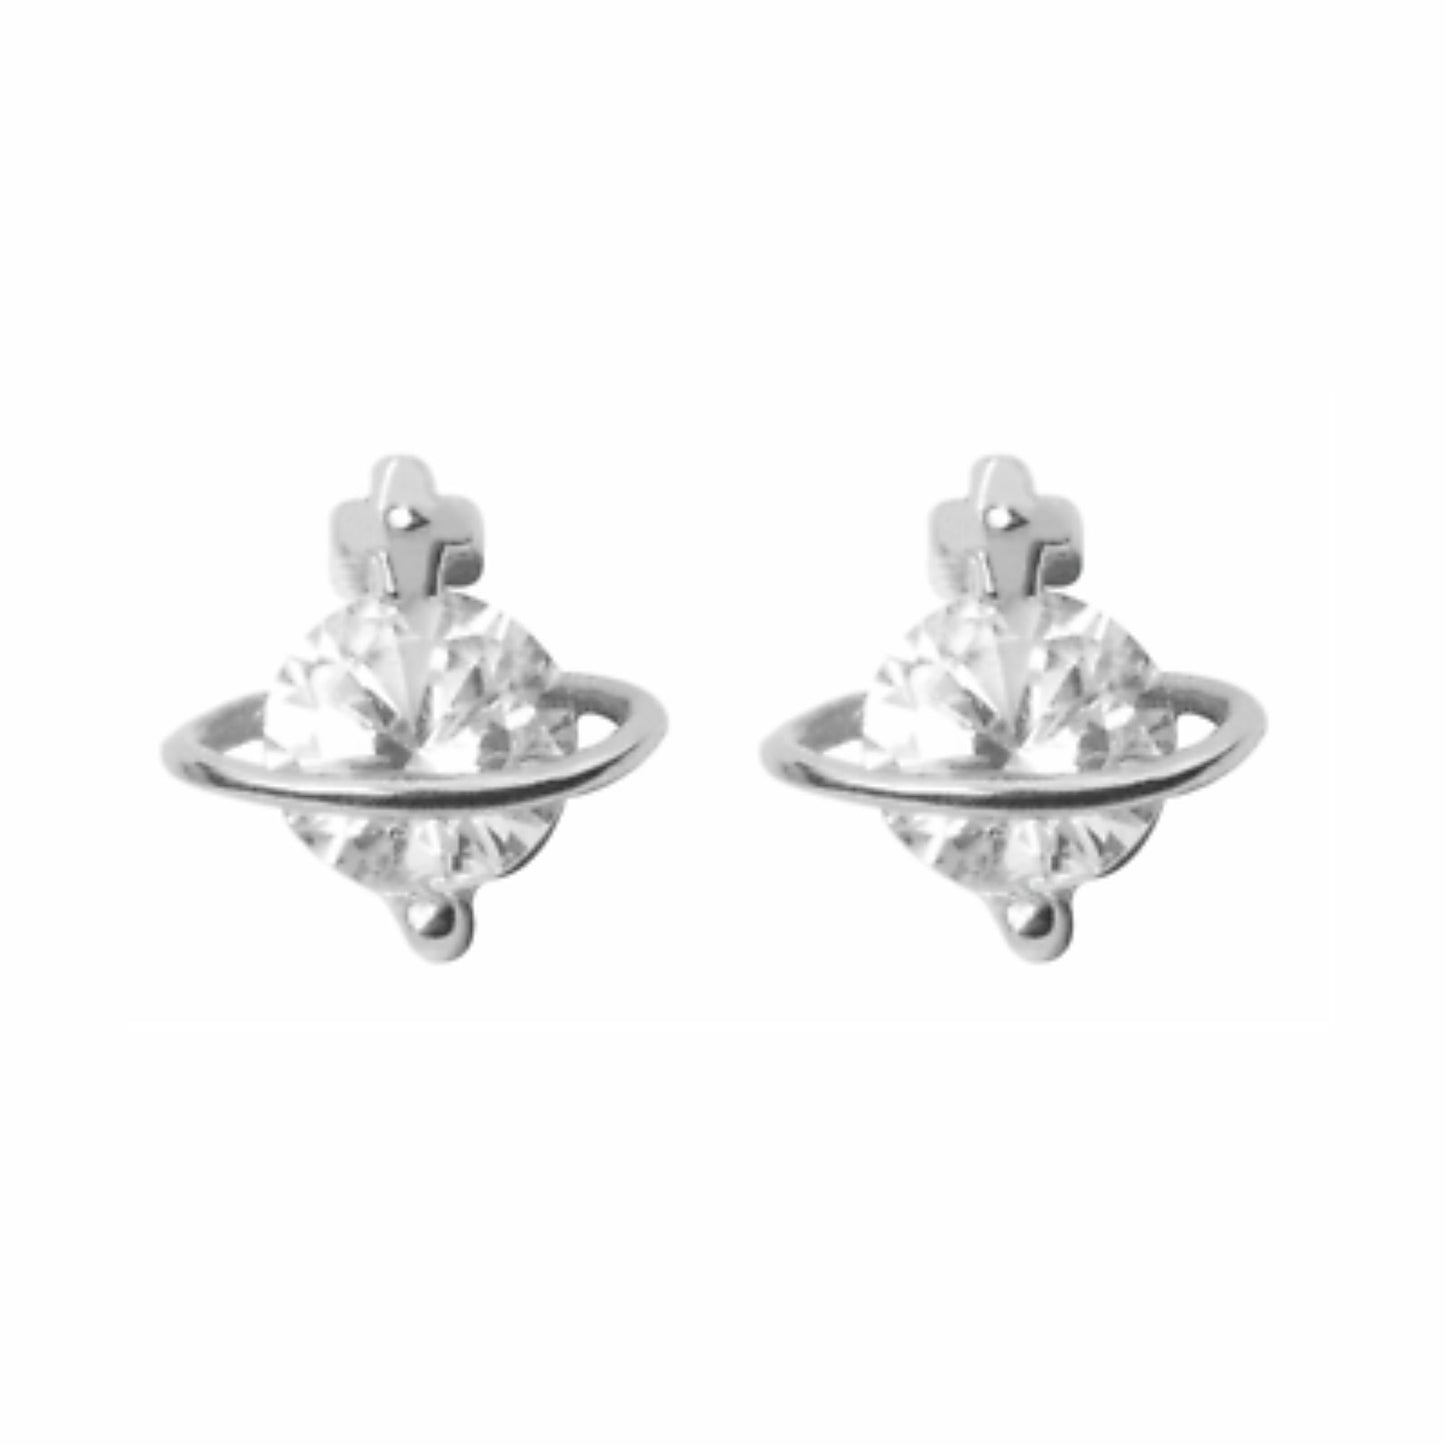 4mm CZ Stud Earrings with 925 Sterling Silver Saturn Space Star Design